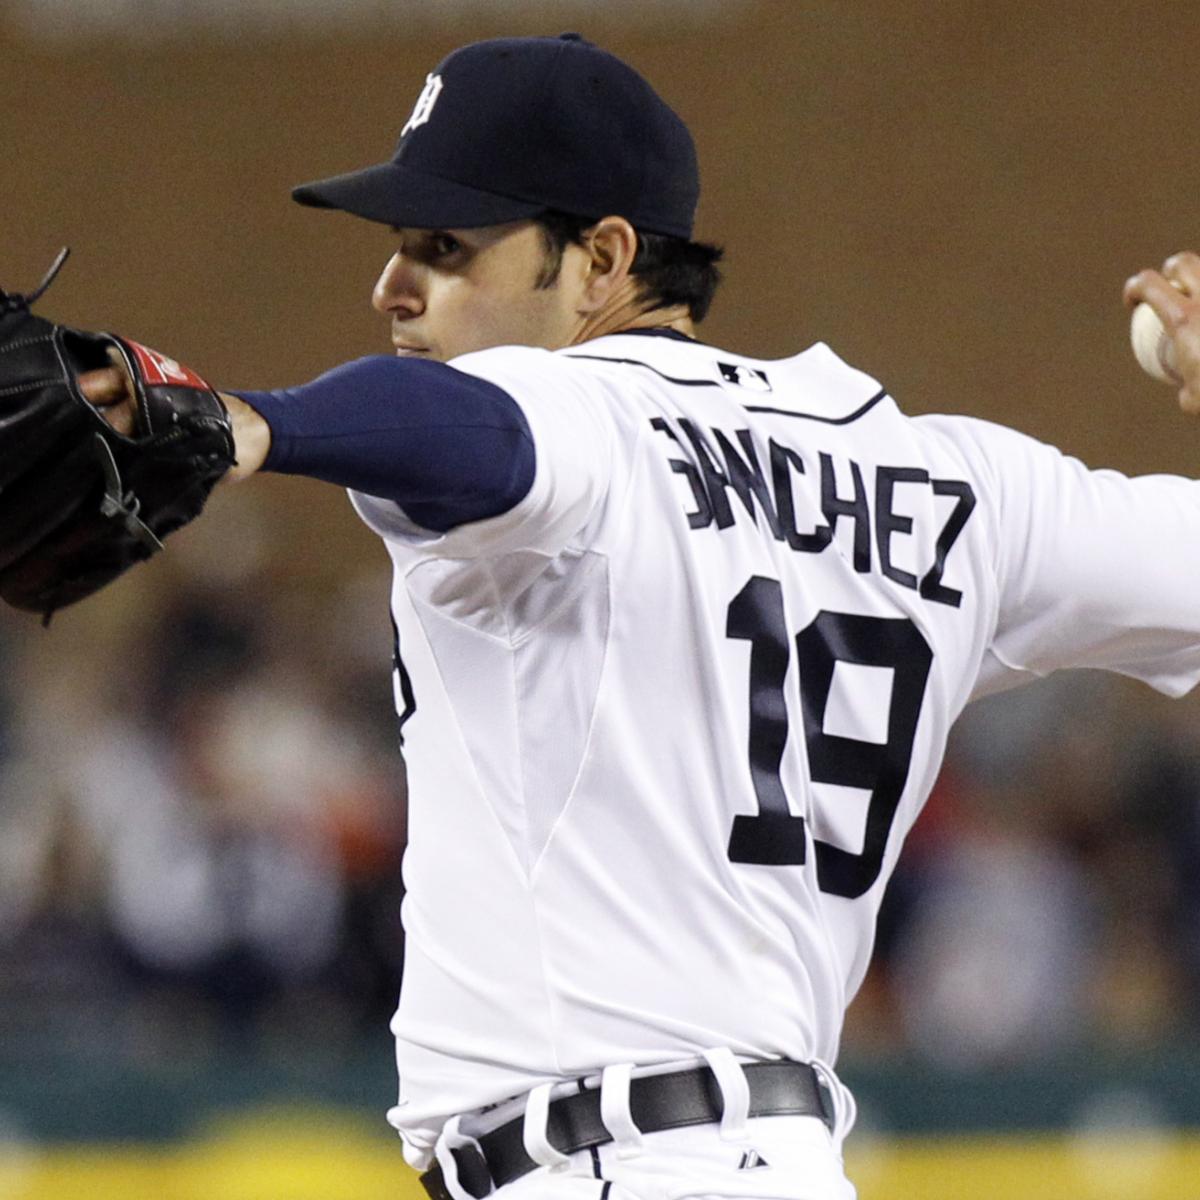 Anibal Sanchez Further Cements Ace Status with 1-Hitter vs. Twins